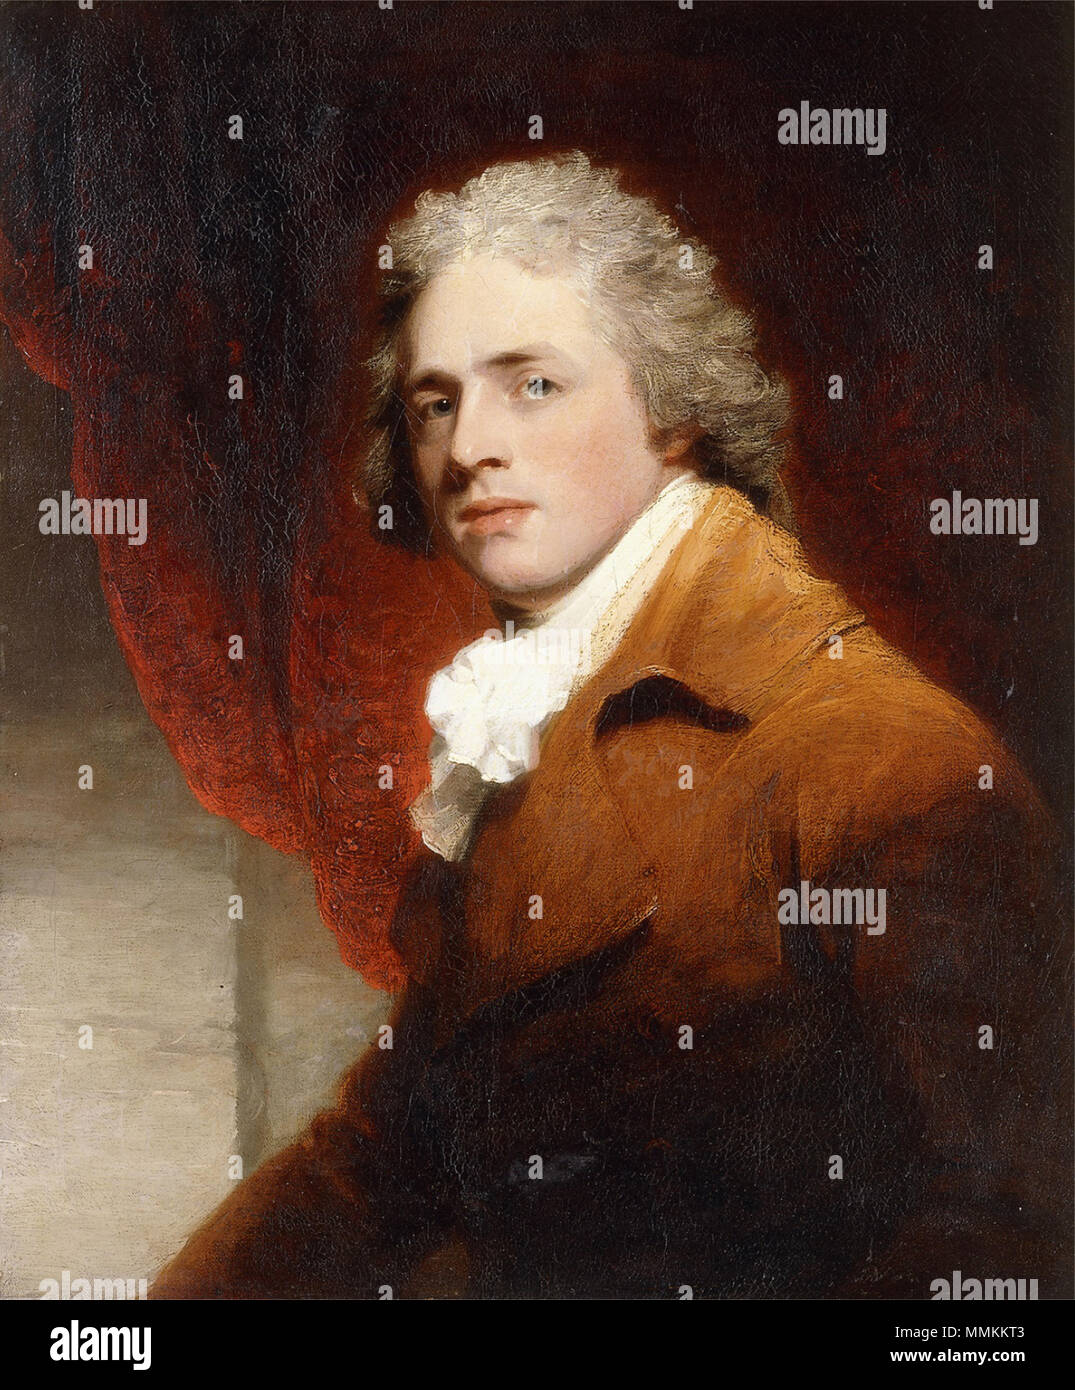 . The sitter has traditionally been identified as Richard Brinsley Sheridan (1751-1816).  Portrait of a Gentleman, Half-Length, in a Brown and White Stock, a Red Curtain Behind John Hoppner - Portrait of a Gentleman, traditionally been identified as Richard Brinsley Sheridan Stock Photo